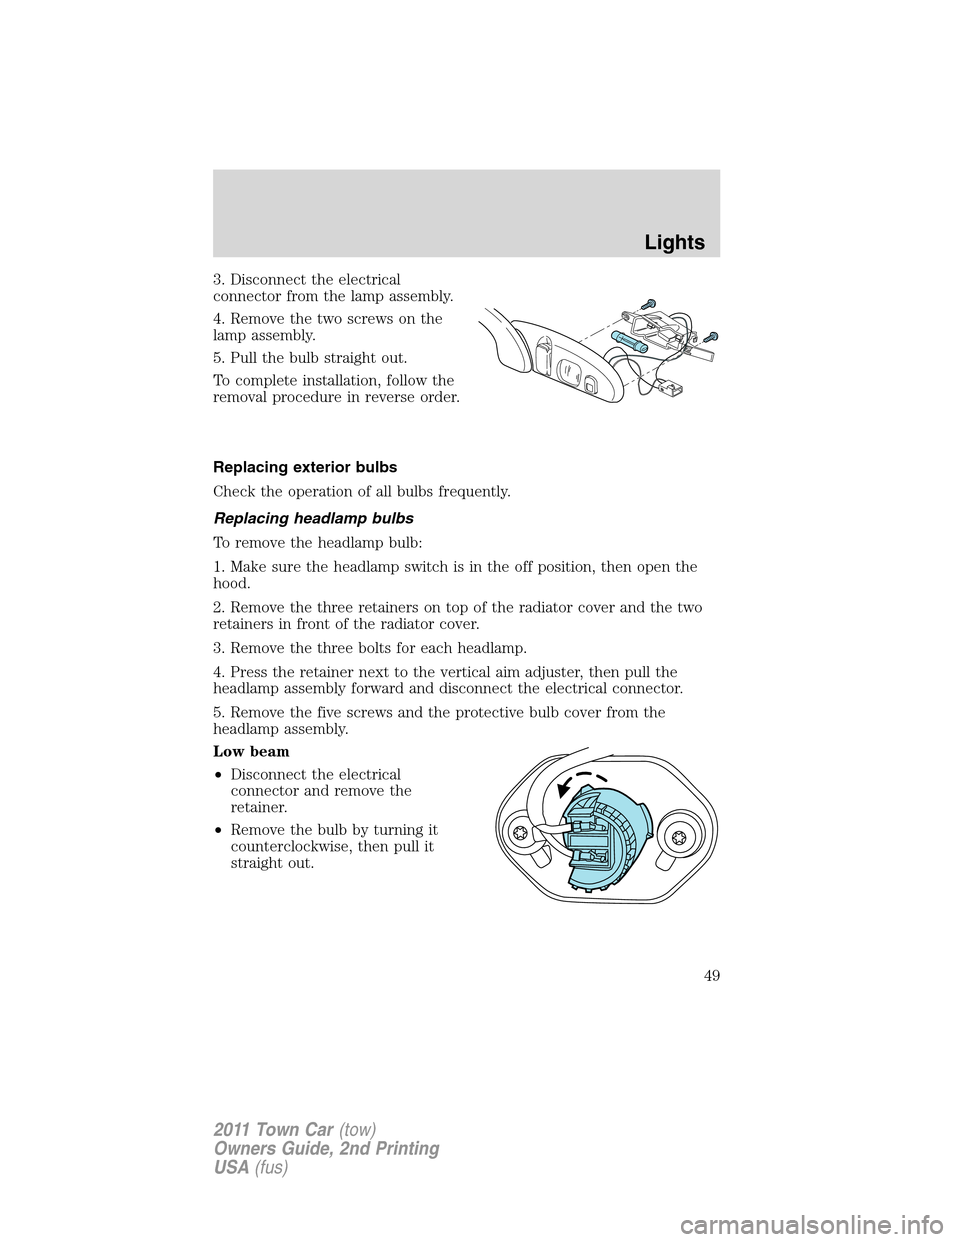 LINCOLN TOWN CAR 2011 Service Manual 3. Disconnect the electrical
connector from the lamp assembly.
4. Remove the two screws on the
lamp assembly.
5. Pull the bulb straight out.
To complete installation, follow the
removal procedure in r